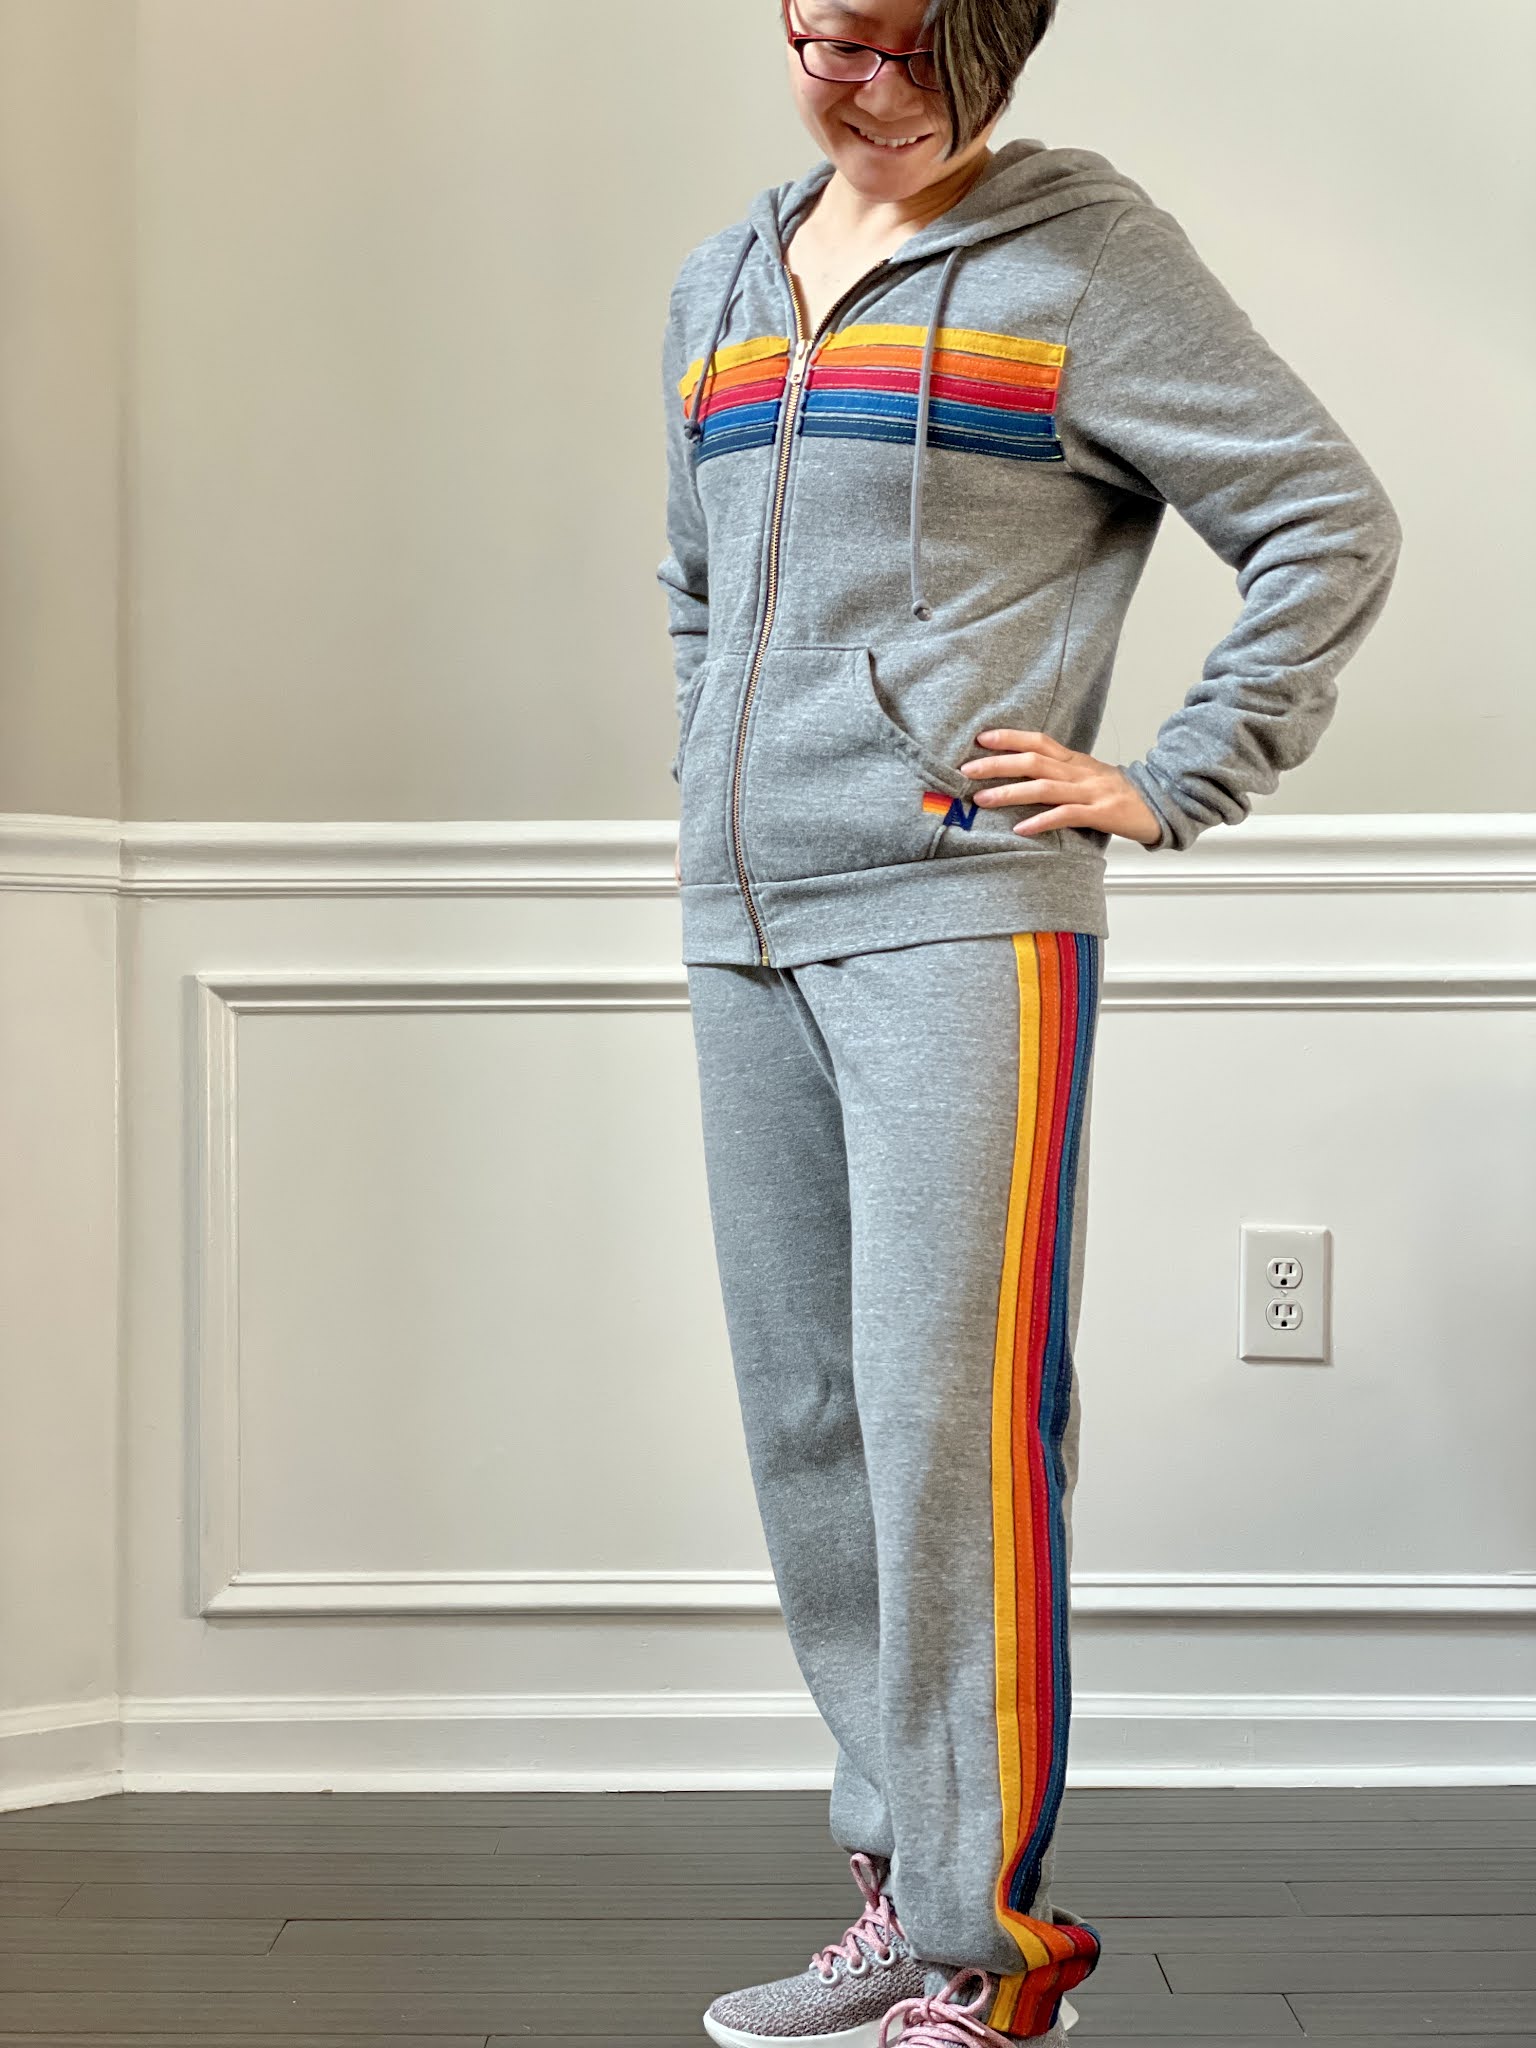 Fit Review Friday! Aviator Nation Velvet Stripe Pullover Hoodie, 5 Stripe  Sweatpants, Hand Dyed Bolt Classic Crop Crew, Velvet Stripe Classic  Sweatshirt